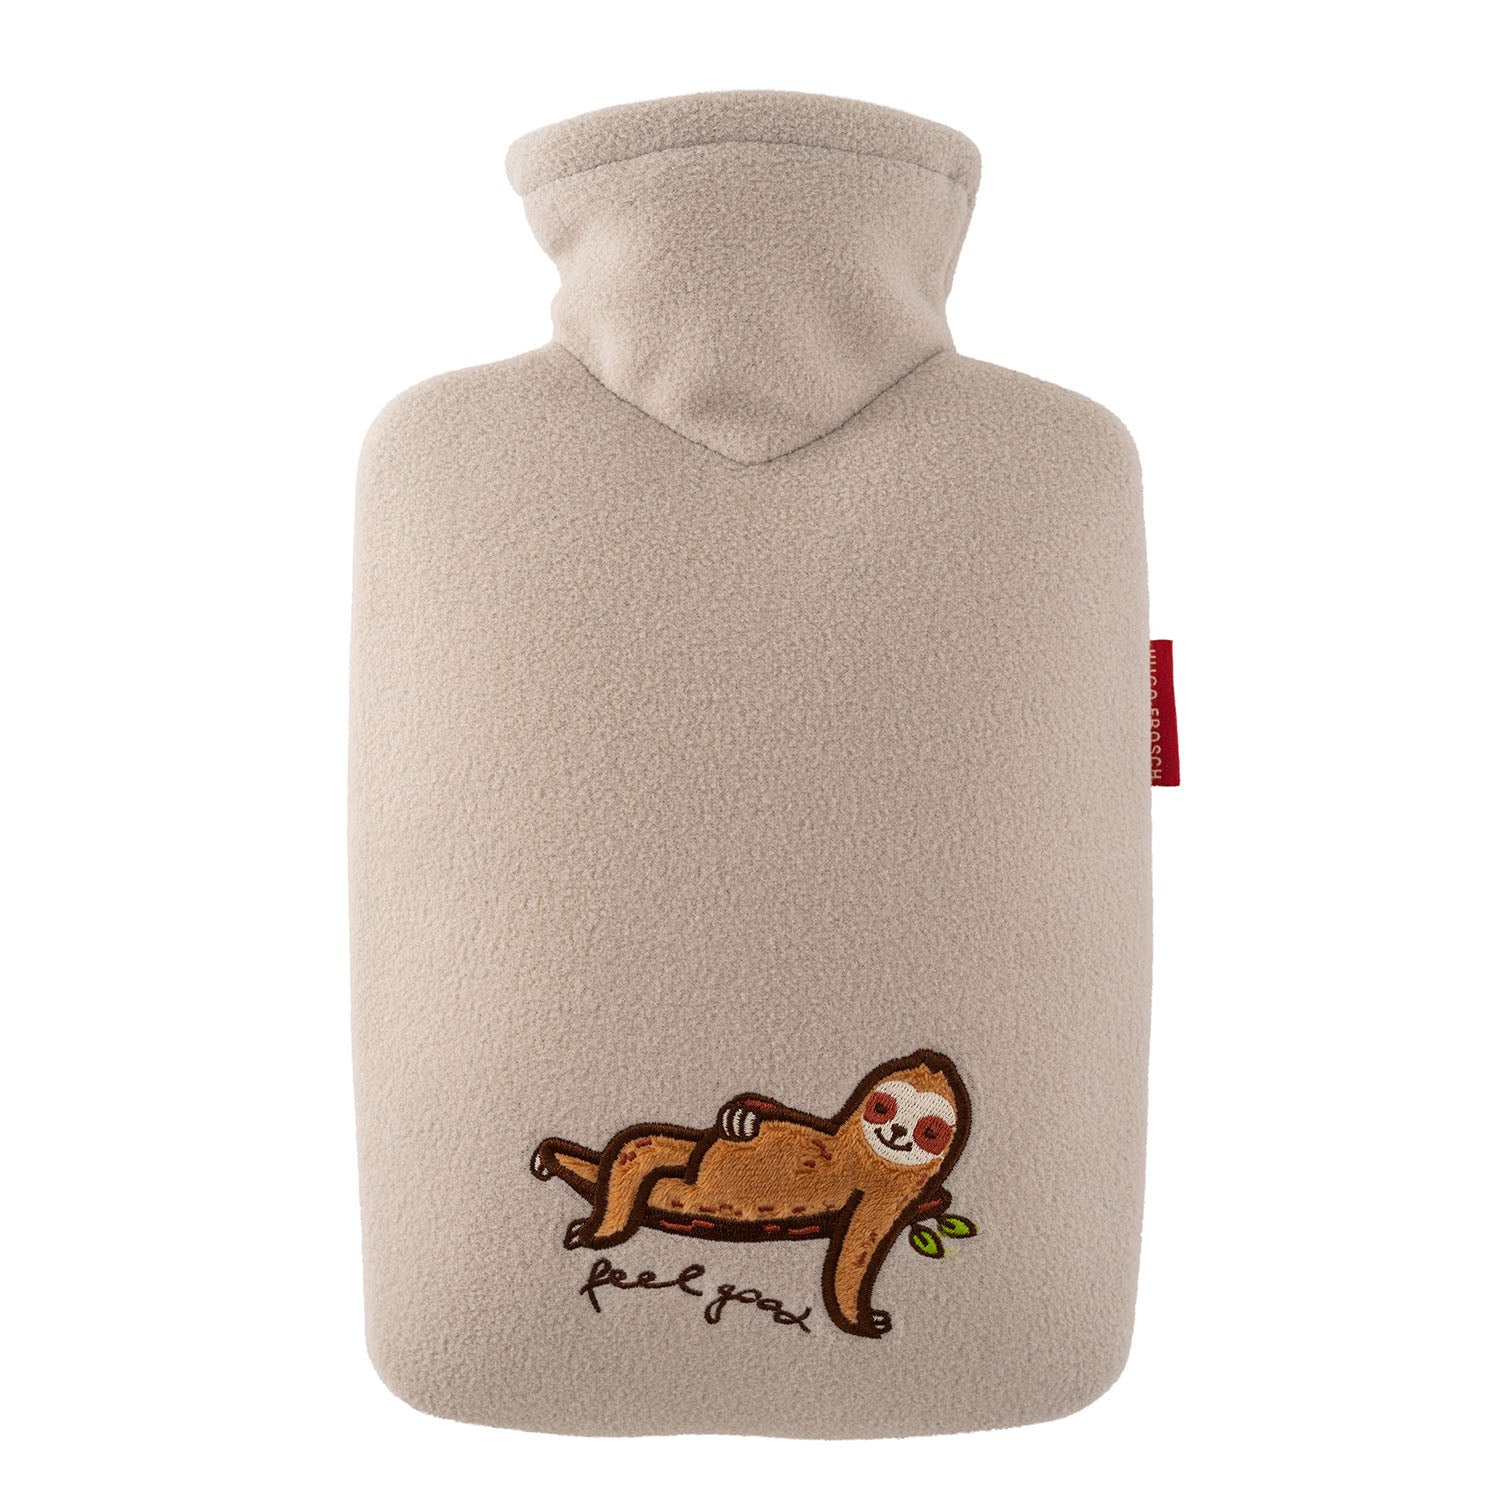 1.8 Litre Classic Hot Water Bottle with Sloth Beige Fleece Cover (rubberless)